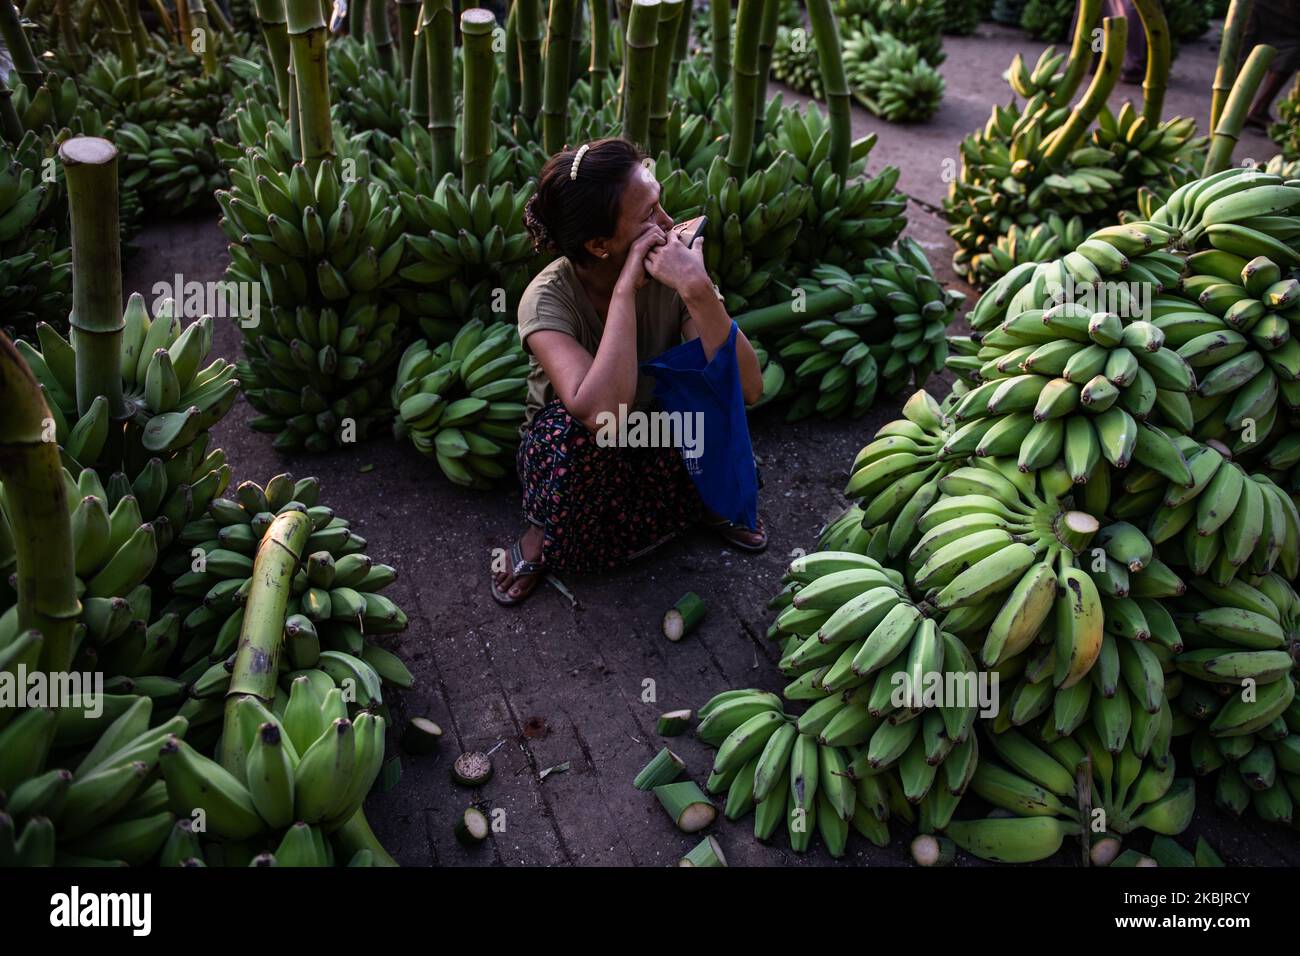 A woman sits near a pile of bananas at a wholesale market in Yangon, Myanmar on March 10, 2020. (Photo by Shwe Paw Mya Tin/NurPhoto) Stock Photo